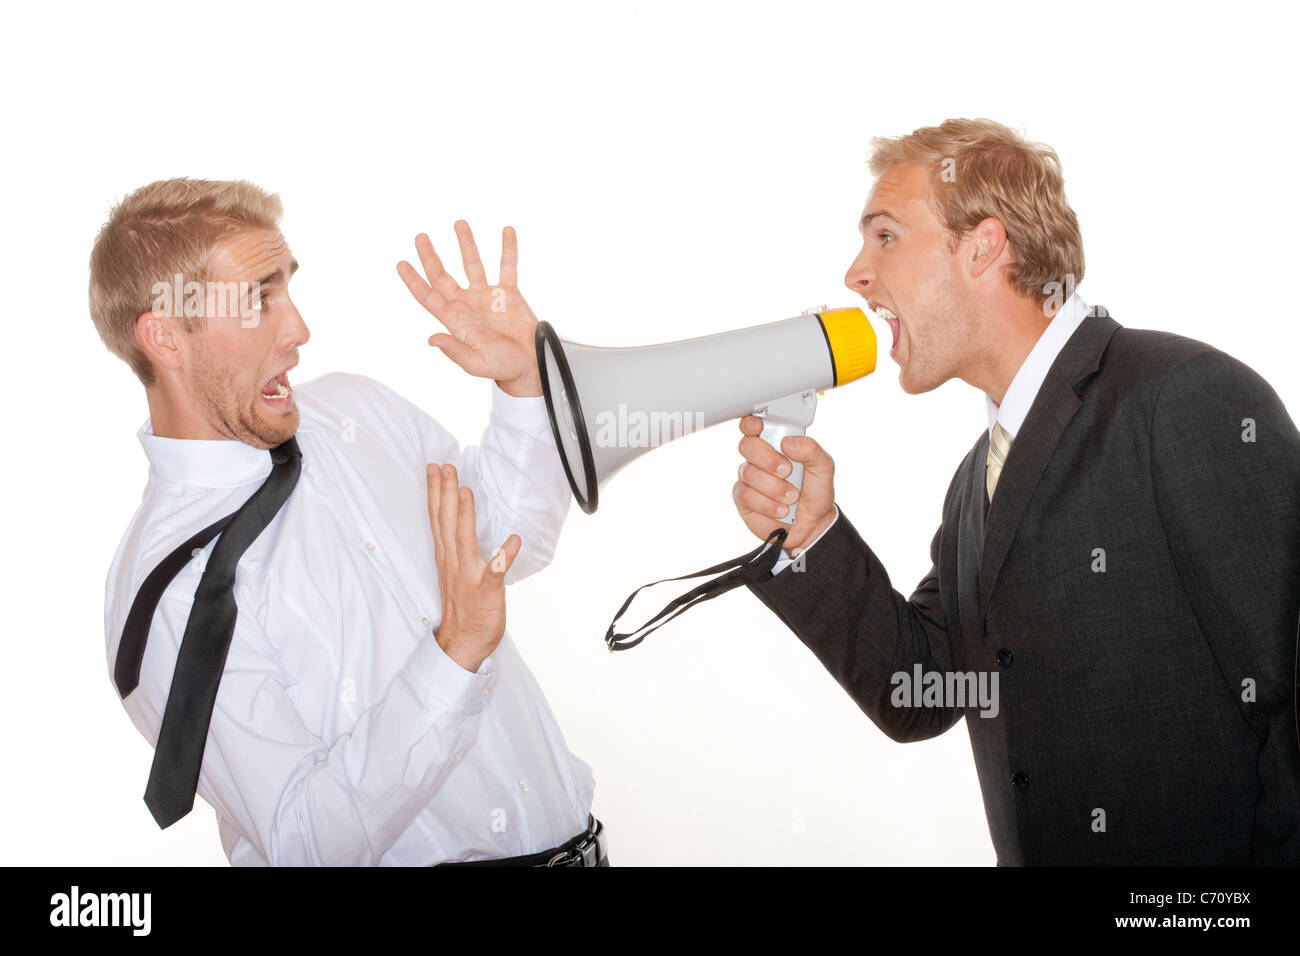 angry boss in suit yelling into a megaphone to scared employee - isolated on white Stock Photo